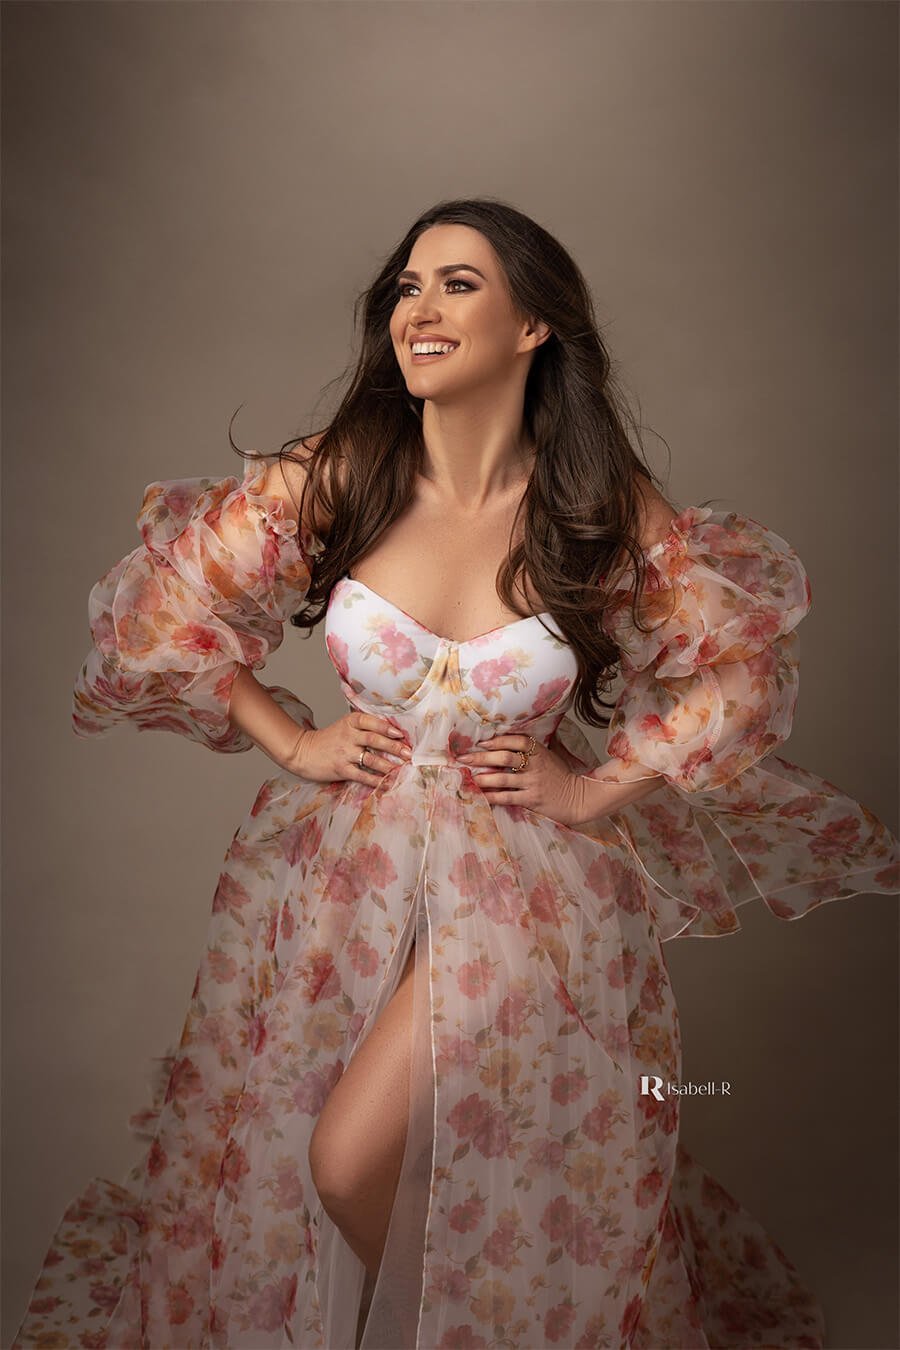 brunette model smiles during her glamour photoshoot. she is wearing a flower patterned dress made of tulle and organza.